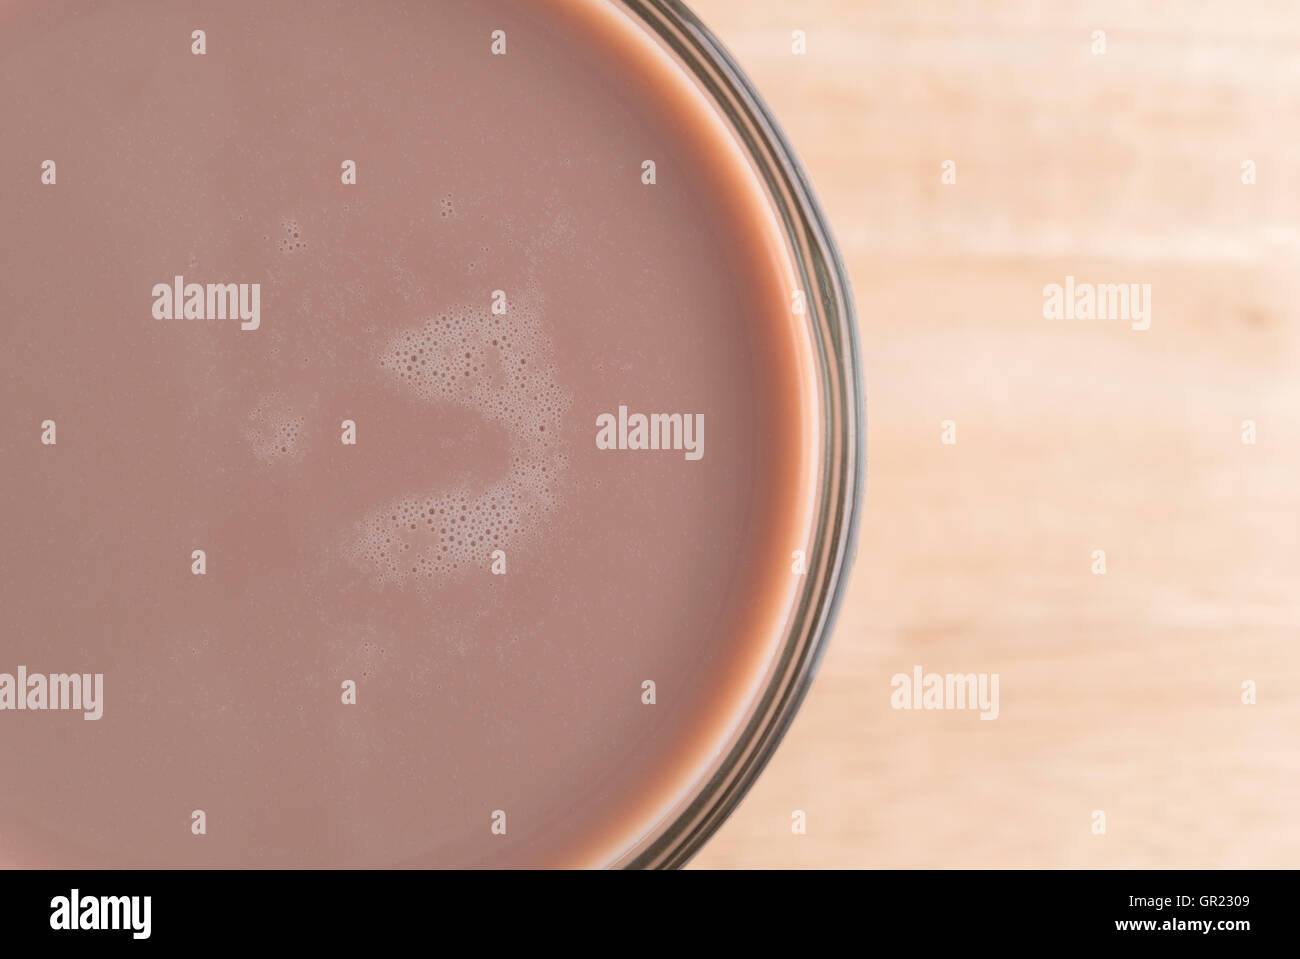 Top close view of a glass of chocolate milk on a wood table. Stock Photo